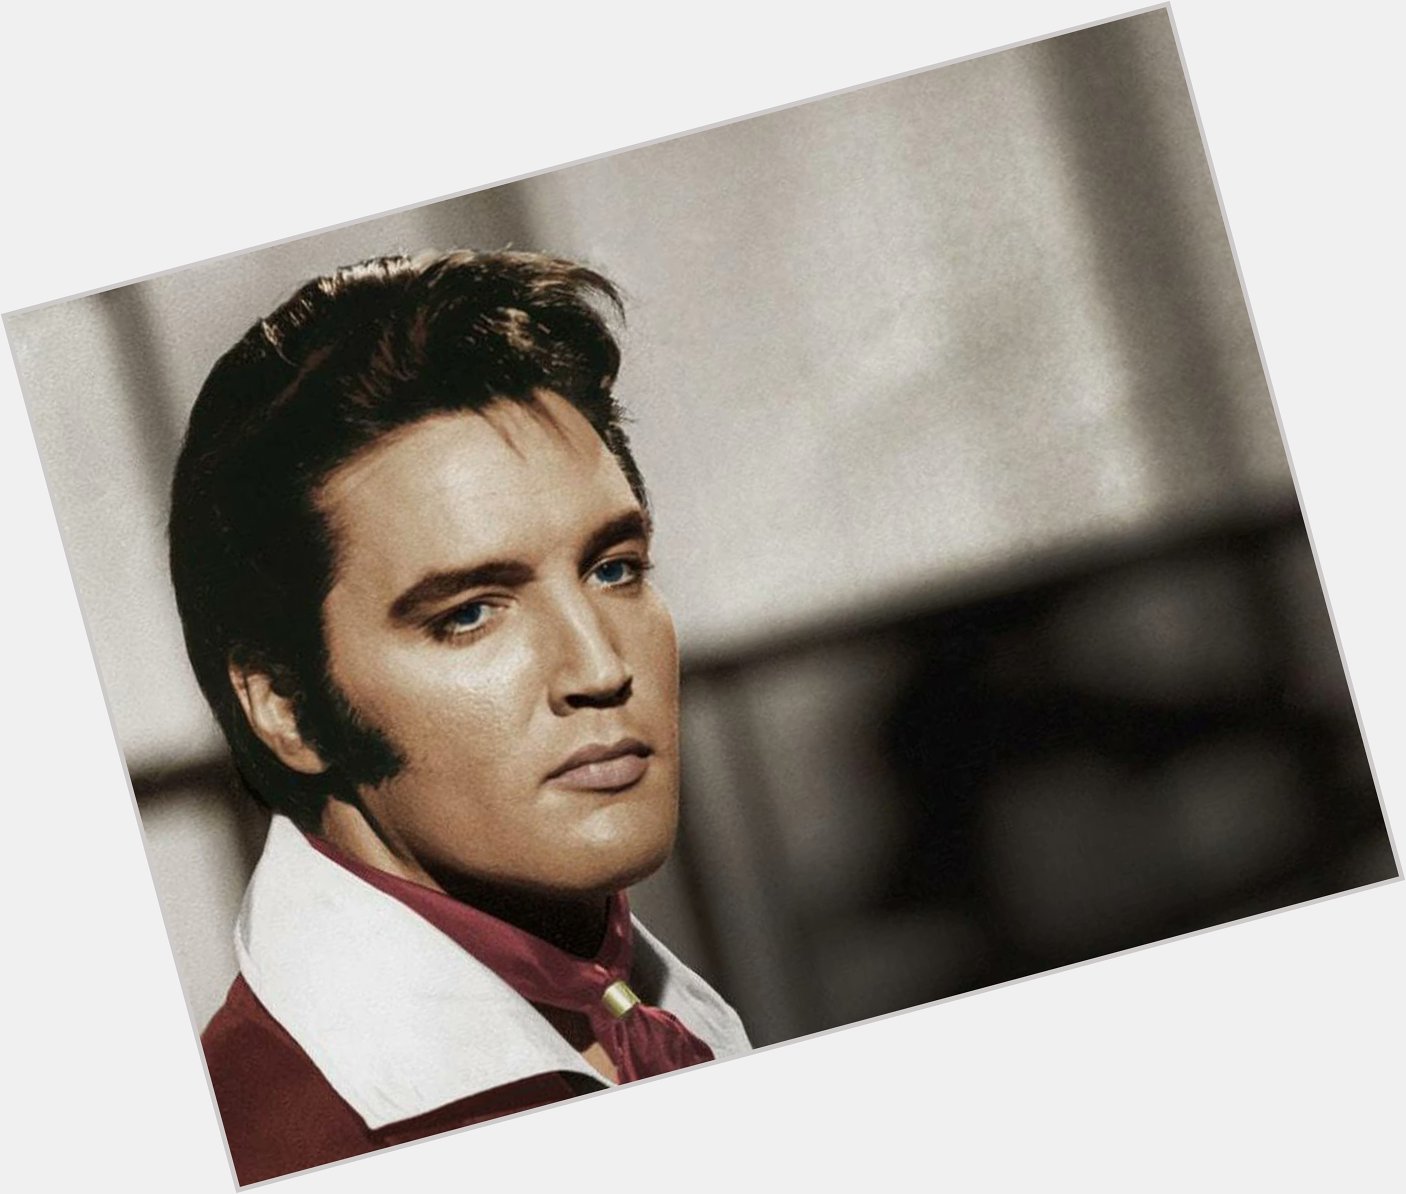 Happy Birthday to The King of Rock and Roll - Elvis Presley       